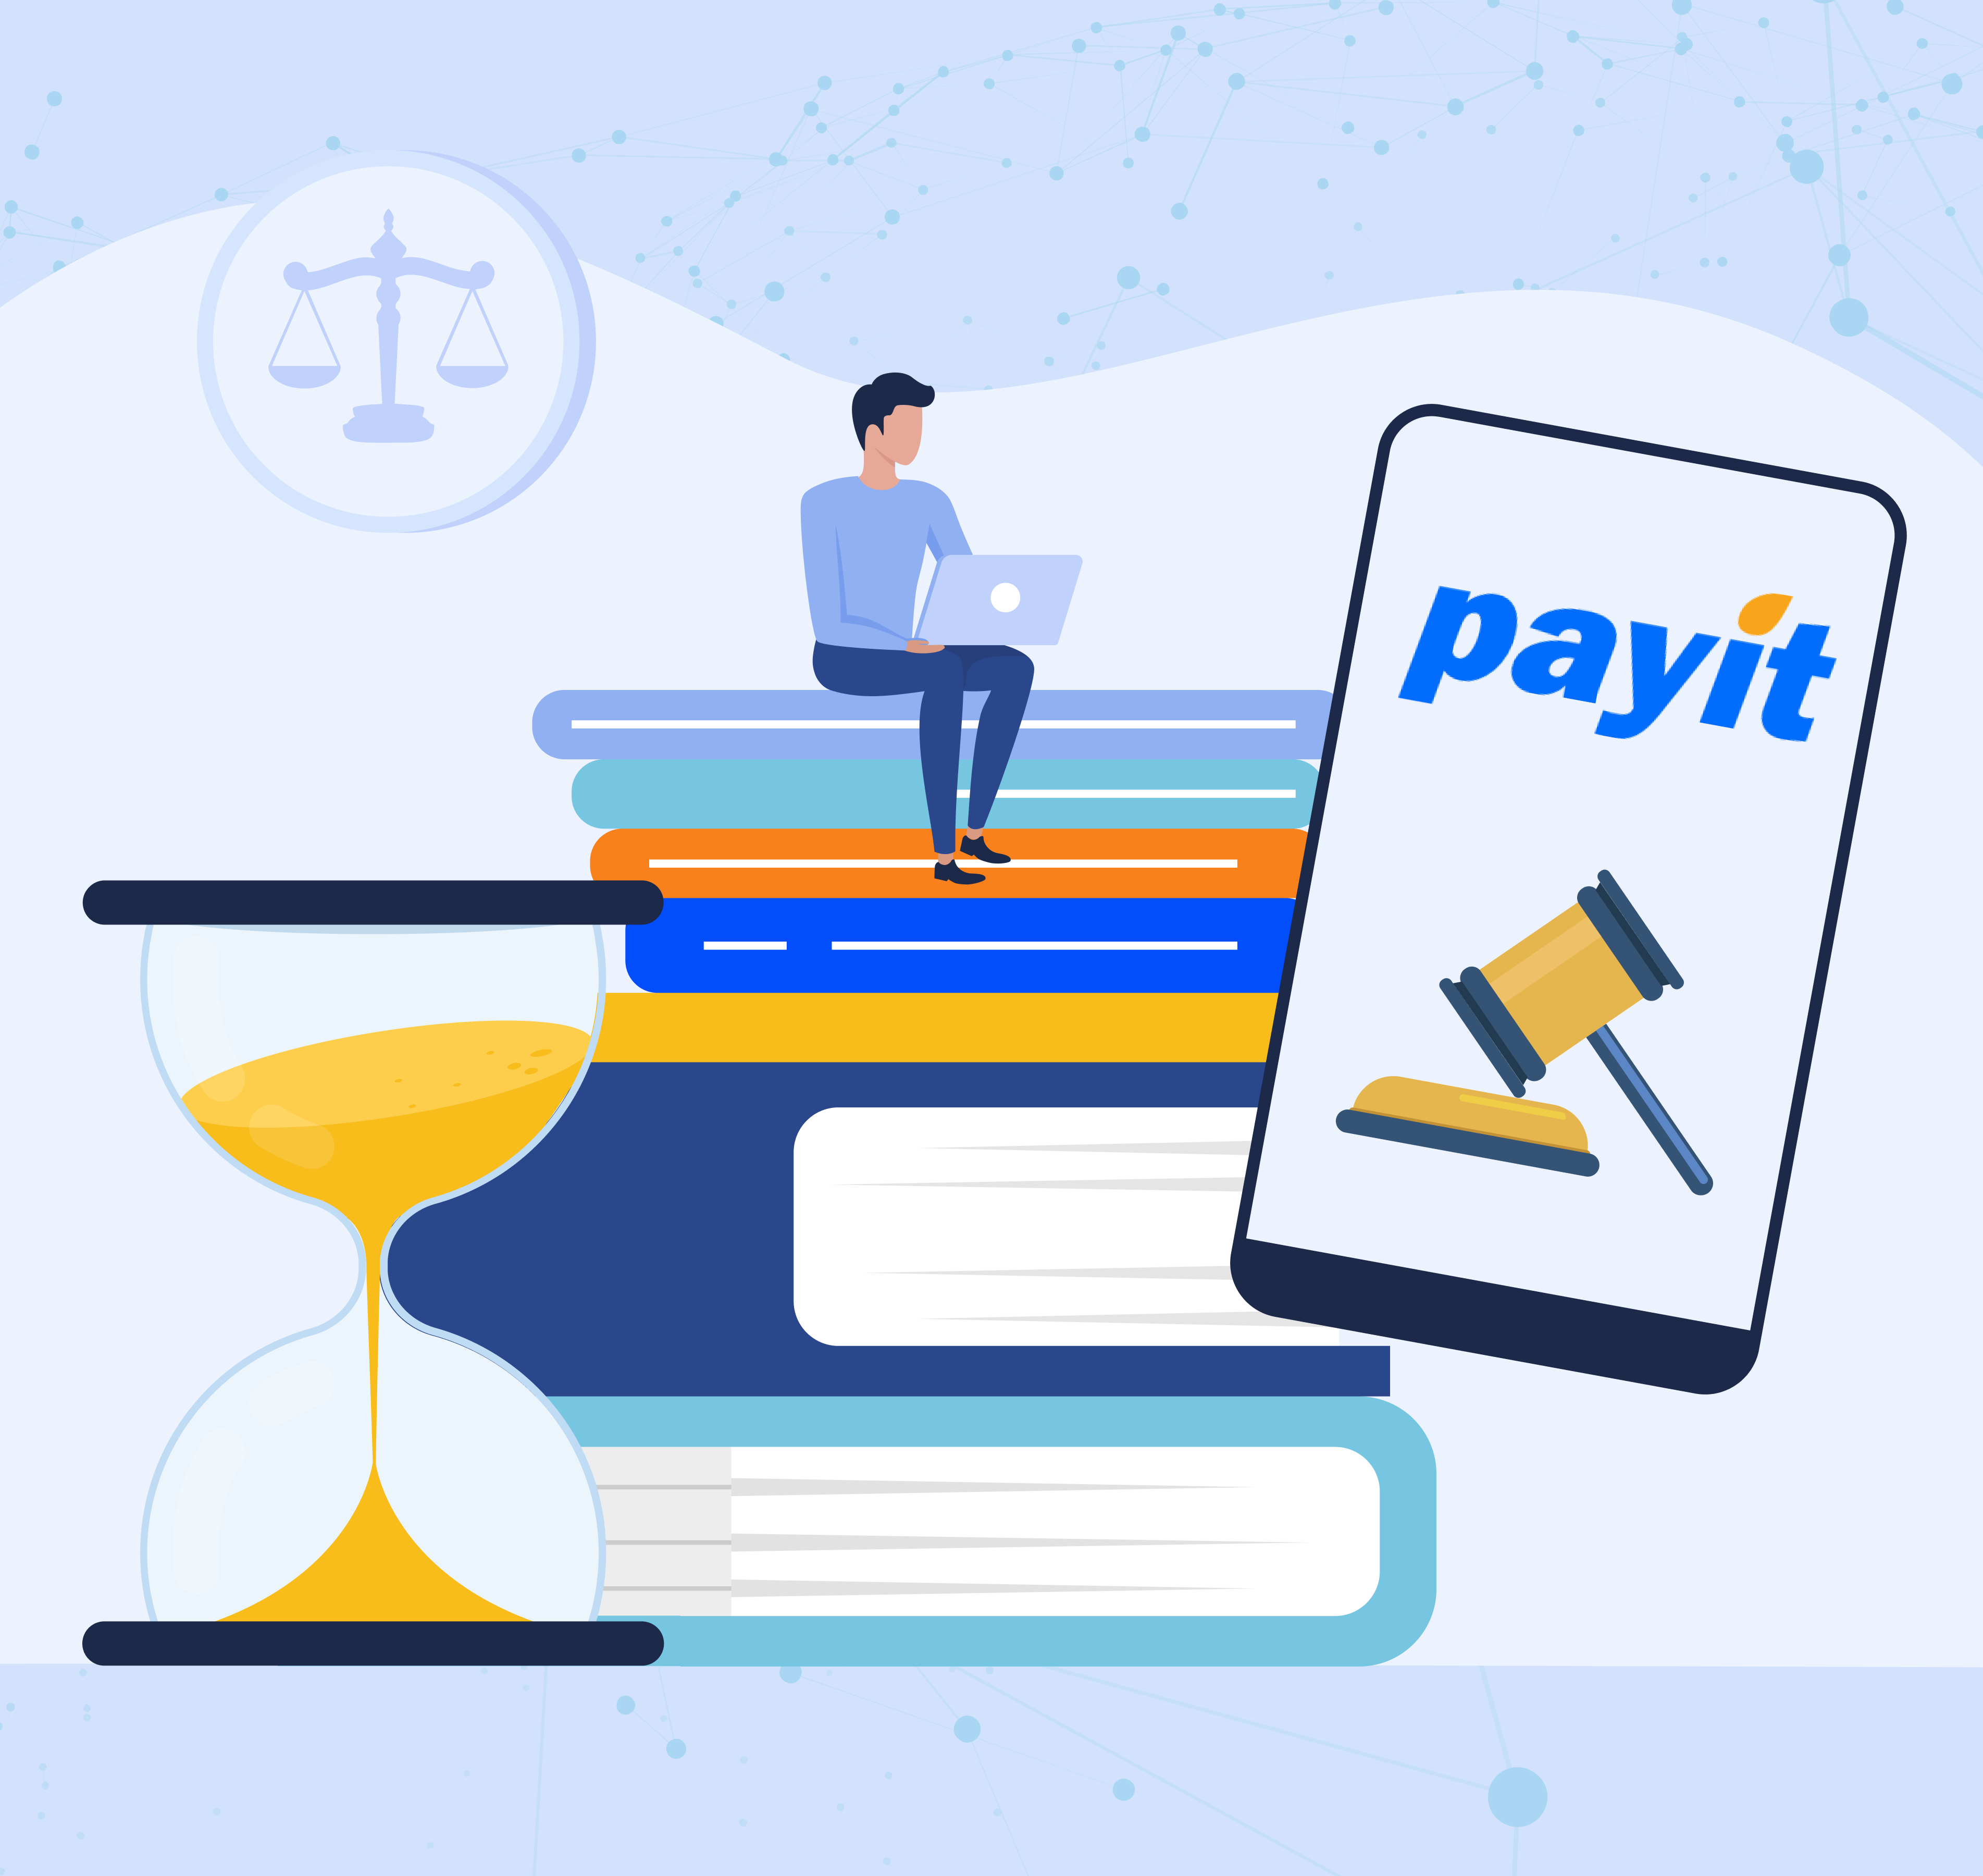 Build a paperless court system with PayIt government platform